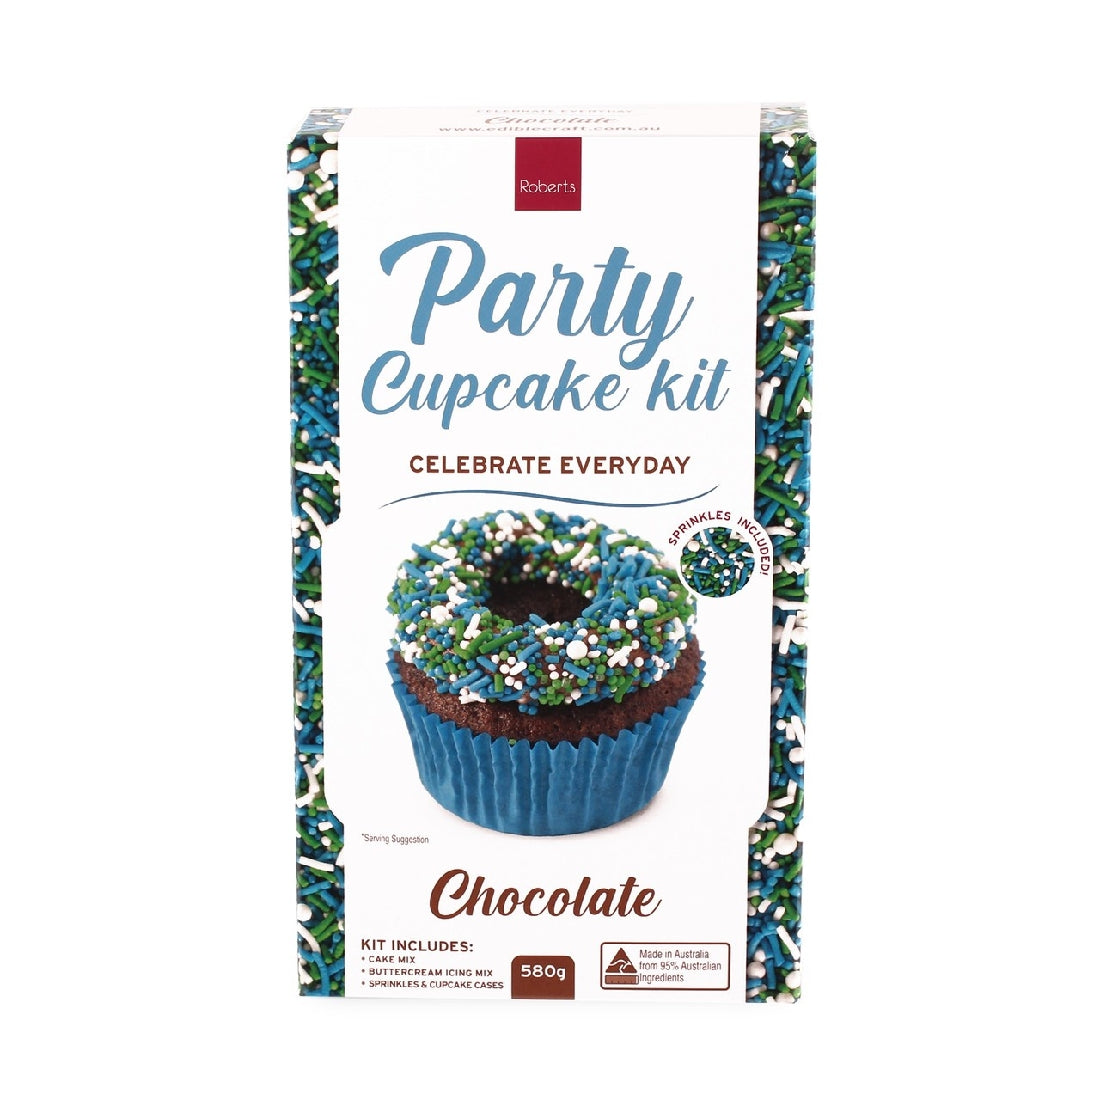 Roberts Edible Craft Chocolate Party Cupcake Kit - Sprinkles & Cases Included